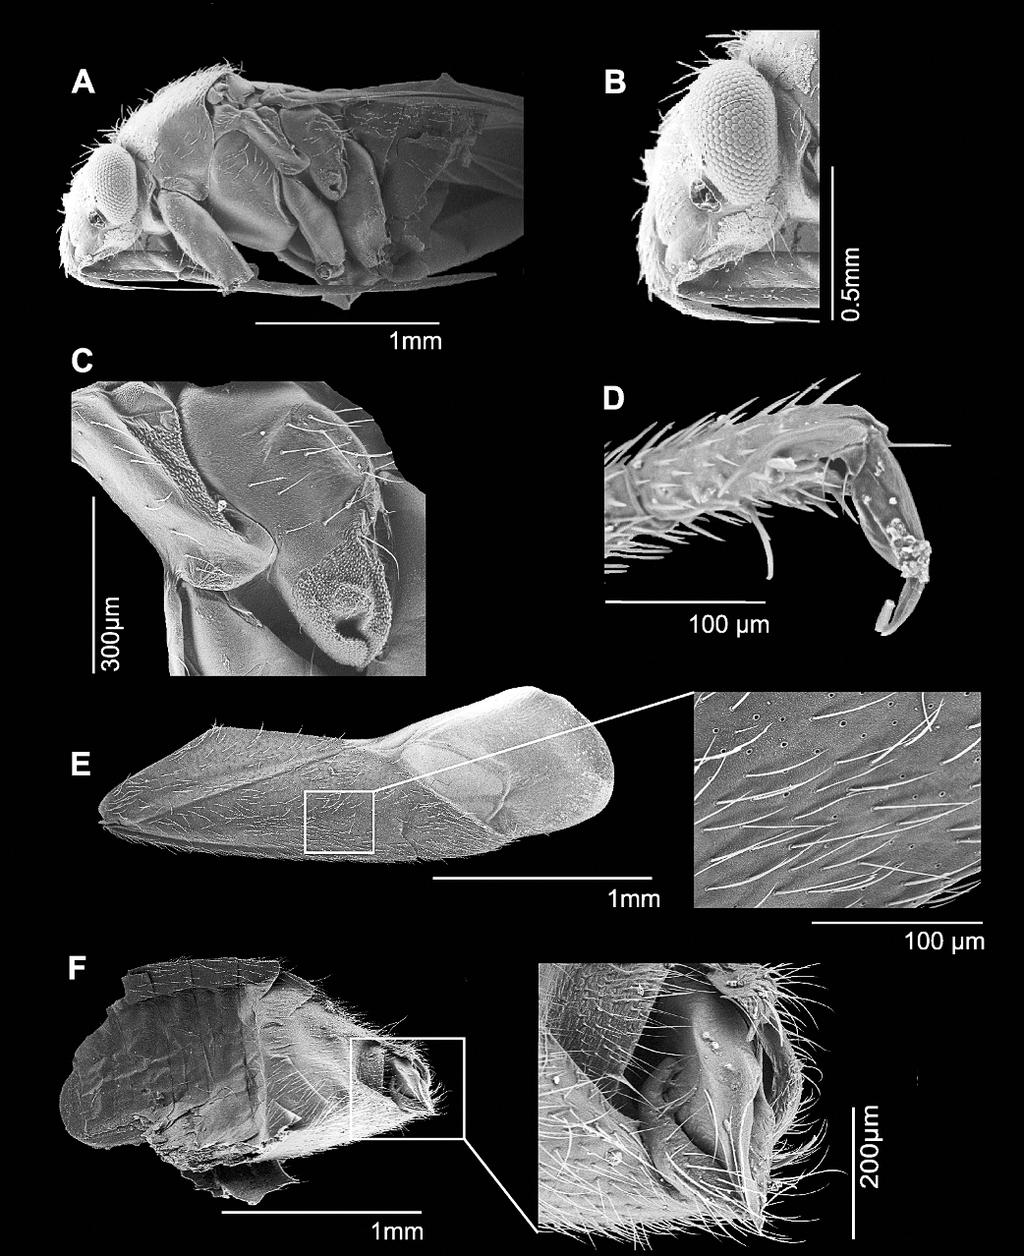 2009 SOTO AND WEIRAUCH: JIWARLI, NEW GENUS OF PLANT BUG 5 Fig. 2. Structures of Jiwarli heliotropium, n. sp., as seen in the scanning electron microscope. A. Head and thorax, lateral view. B. Head, lateral view.